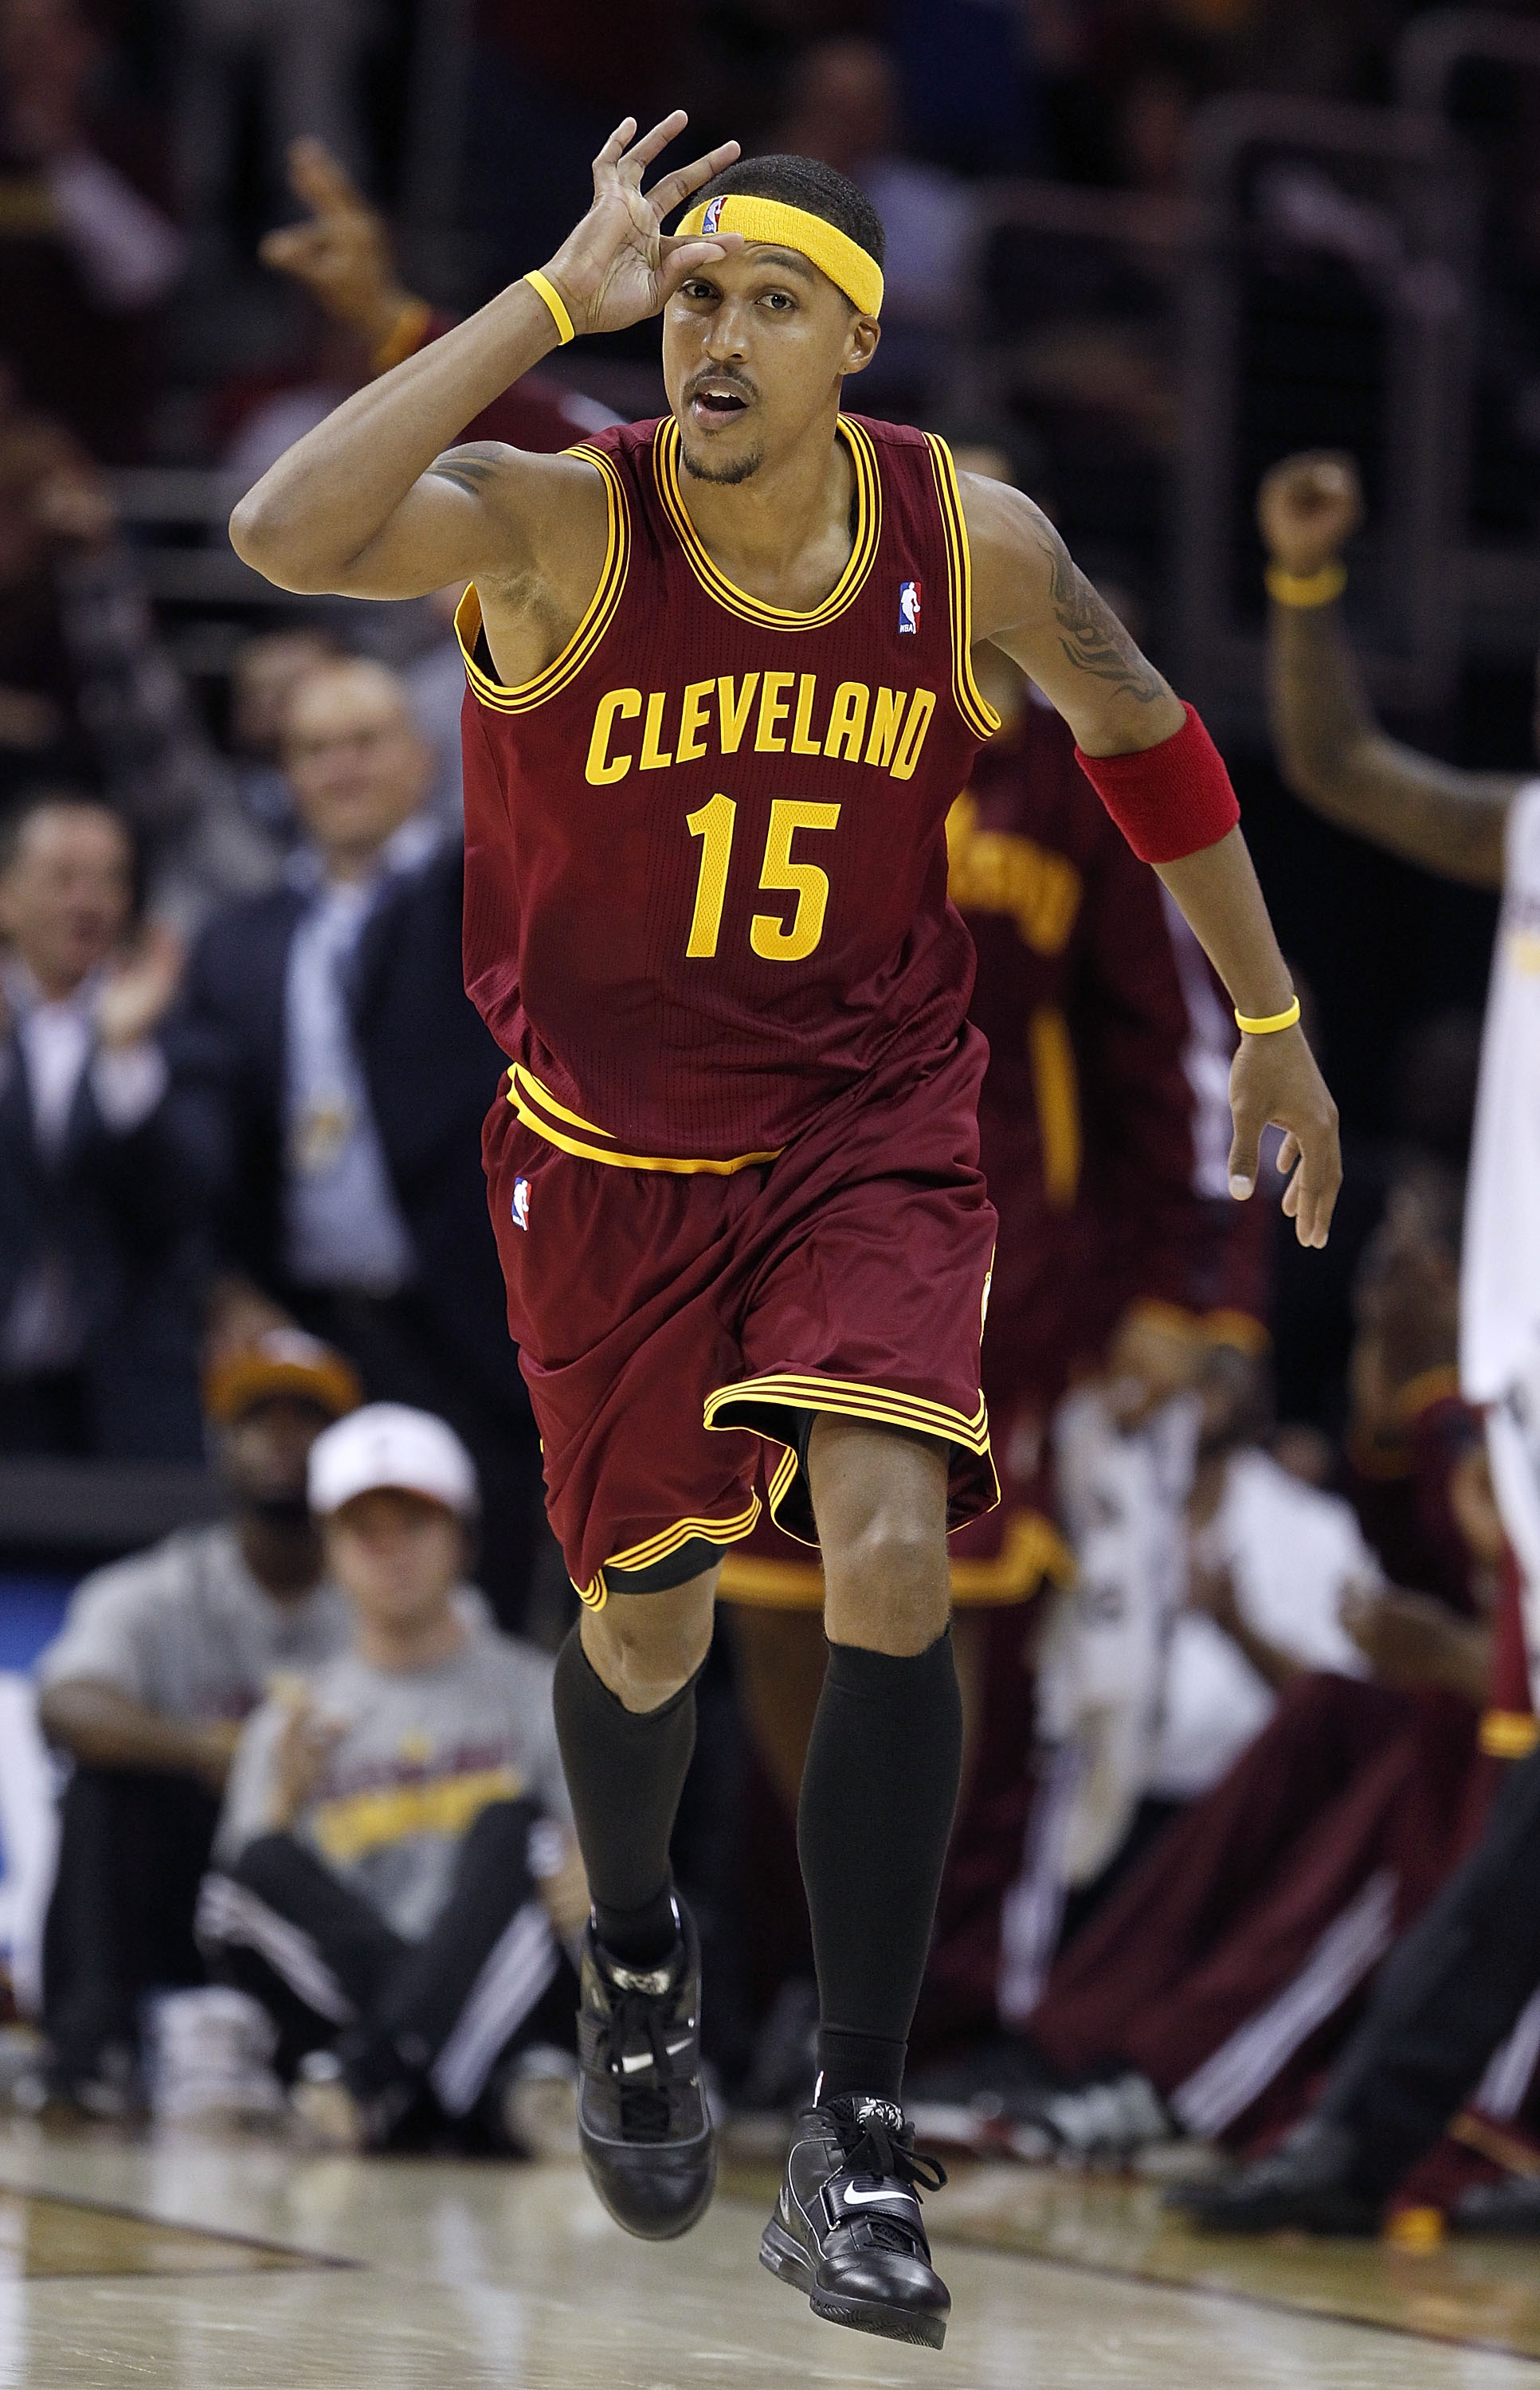 CLEVELAND - OCTOBER 27:  Jamario Moon #15 of the Cleveland Cavaliers celebrates after making a three point basket while playing the Boston Celtics at Quicken Loans Arena on October 27, 2010 in Cleveland, Ohio. Cleveland won the game 95-87. (Photo by Grego